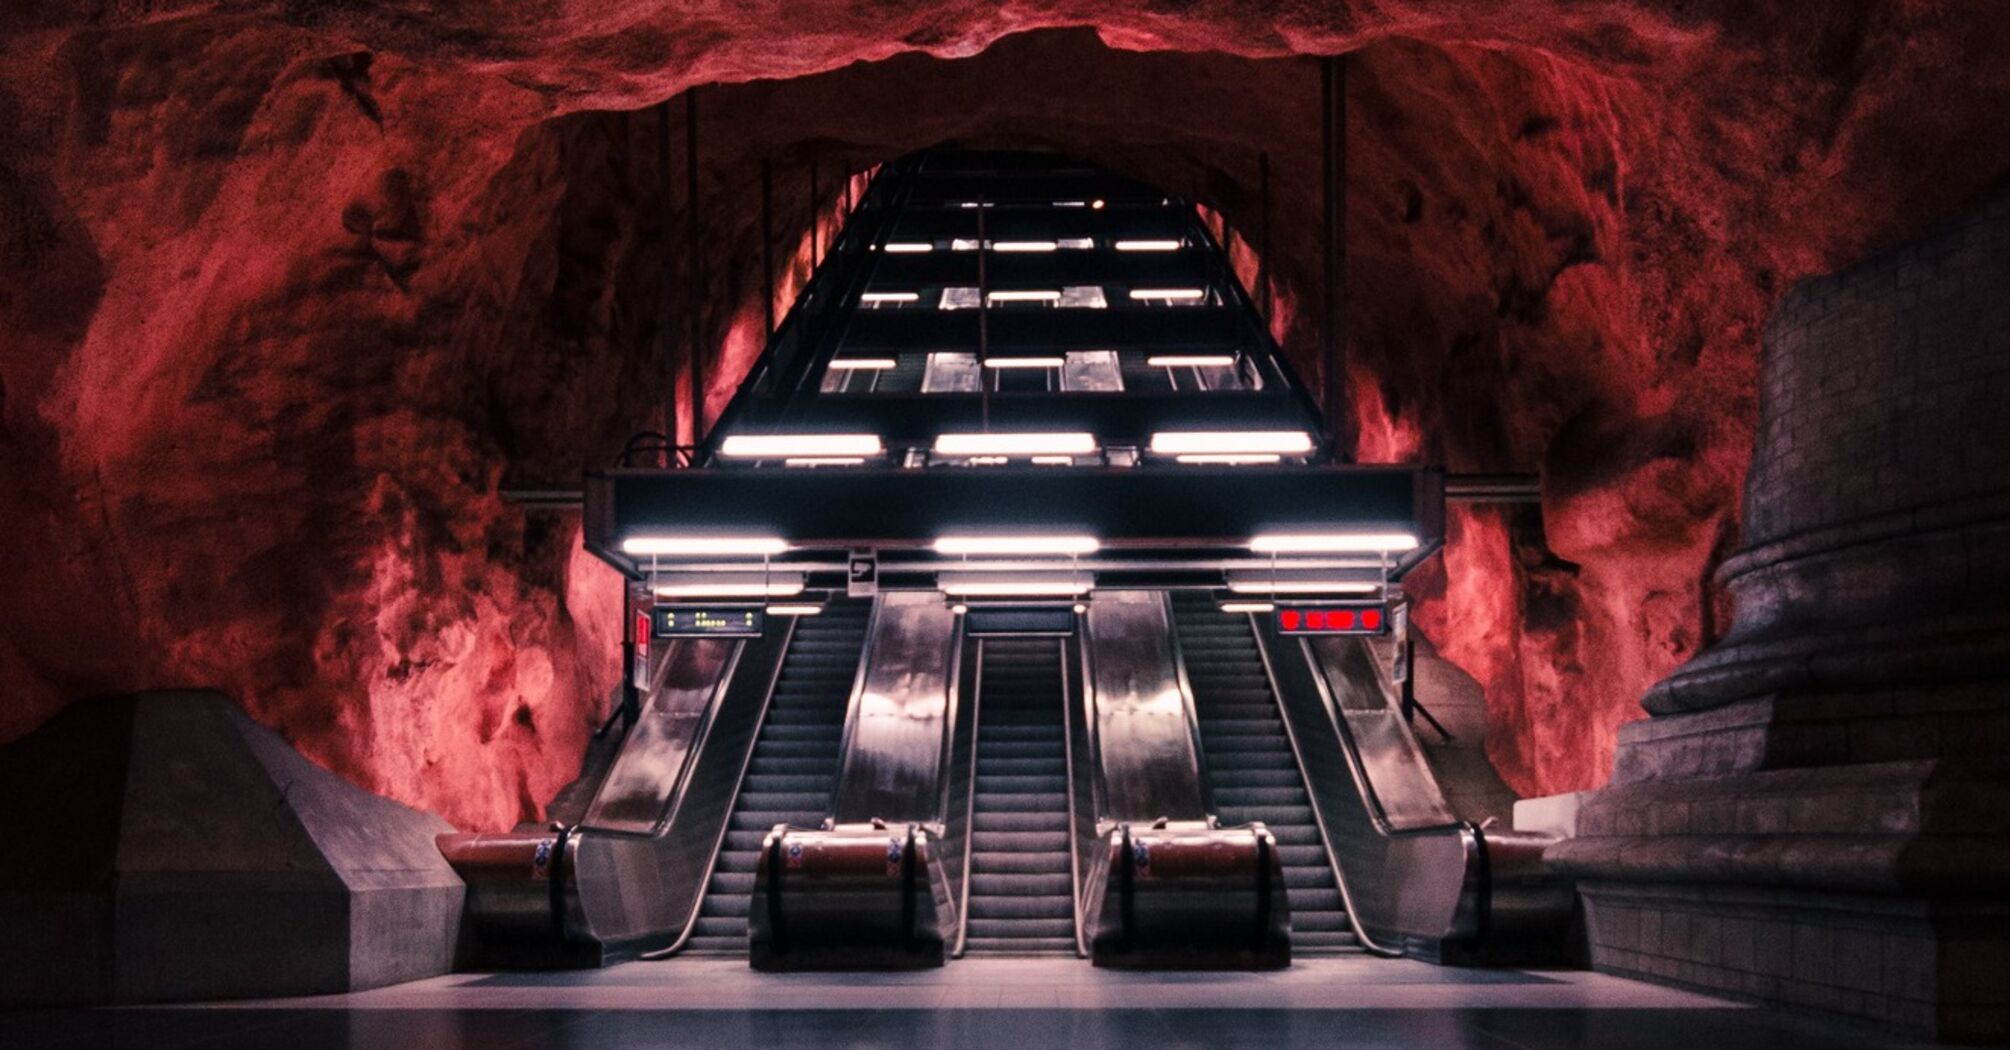 What the subway in Stockholm, which is called the world's longest art exhibition, looks like